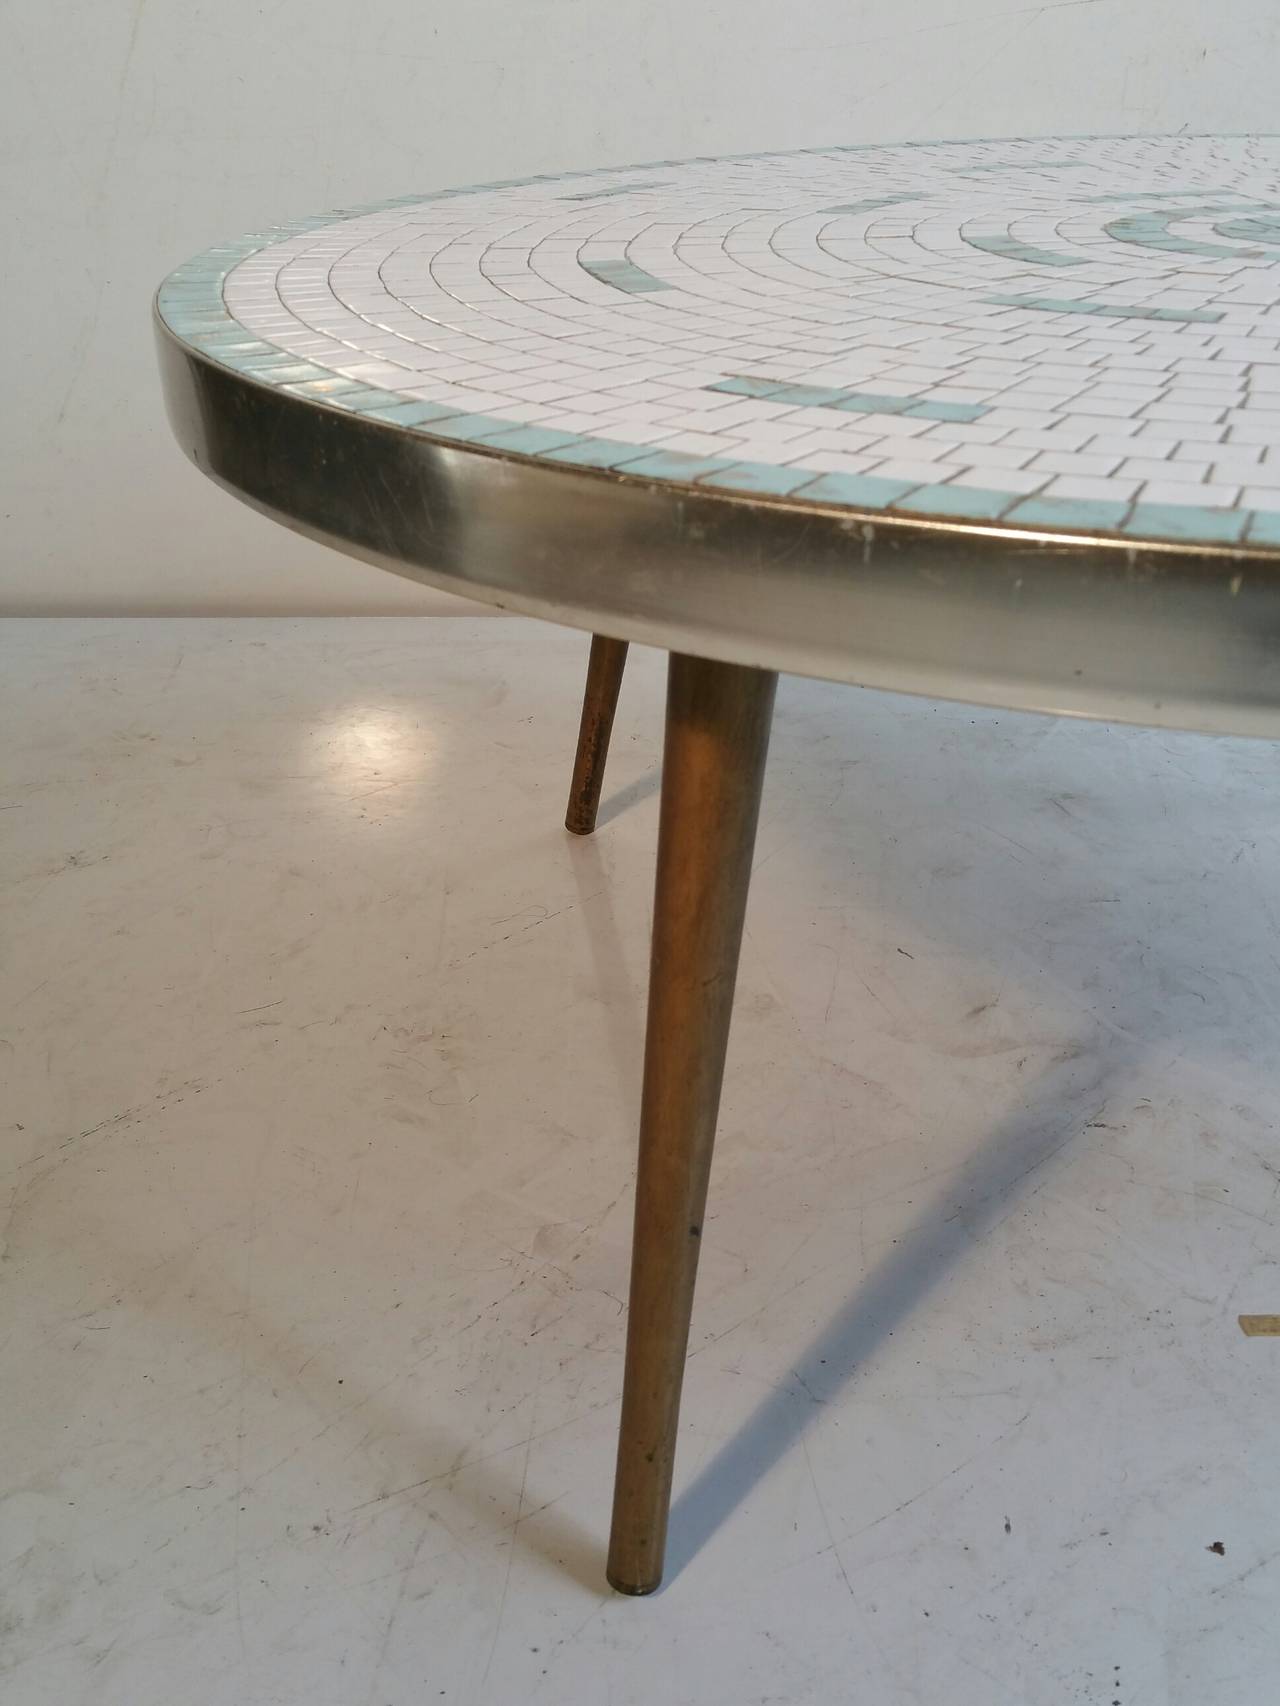 Classic 1950s Tile Top Cocktail Table,, Hohenberg Original..Simple,elegant design,, soothing baby blue and white mossaic tiles with gold accents,,, Painted brass metal legs,,chrome apron,,